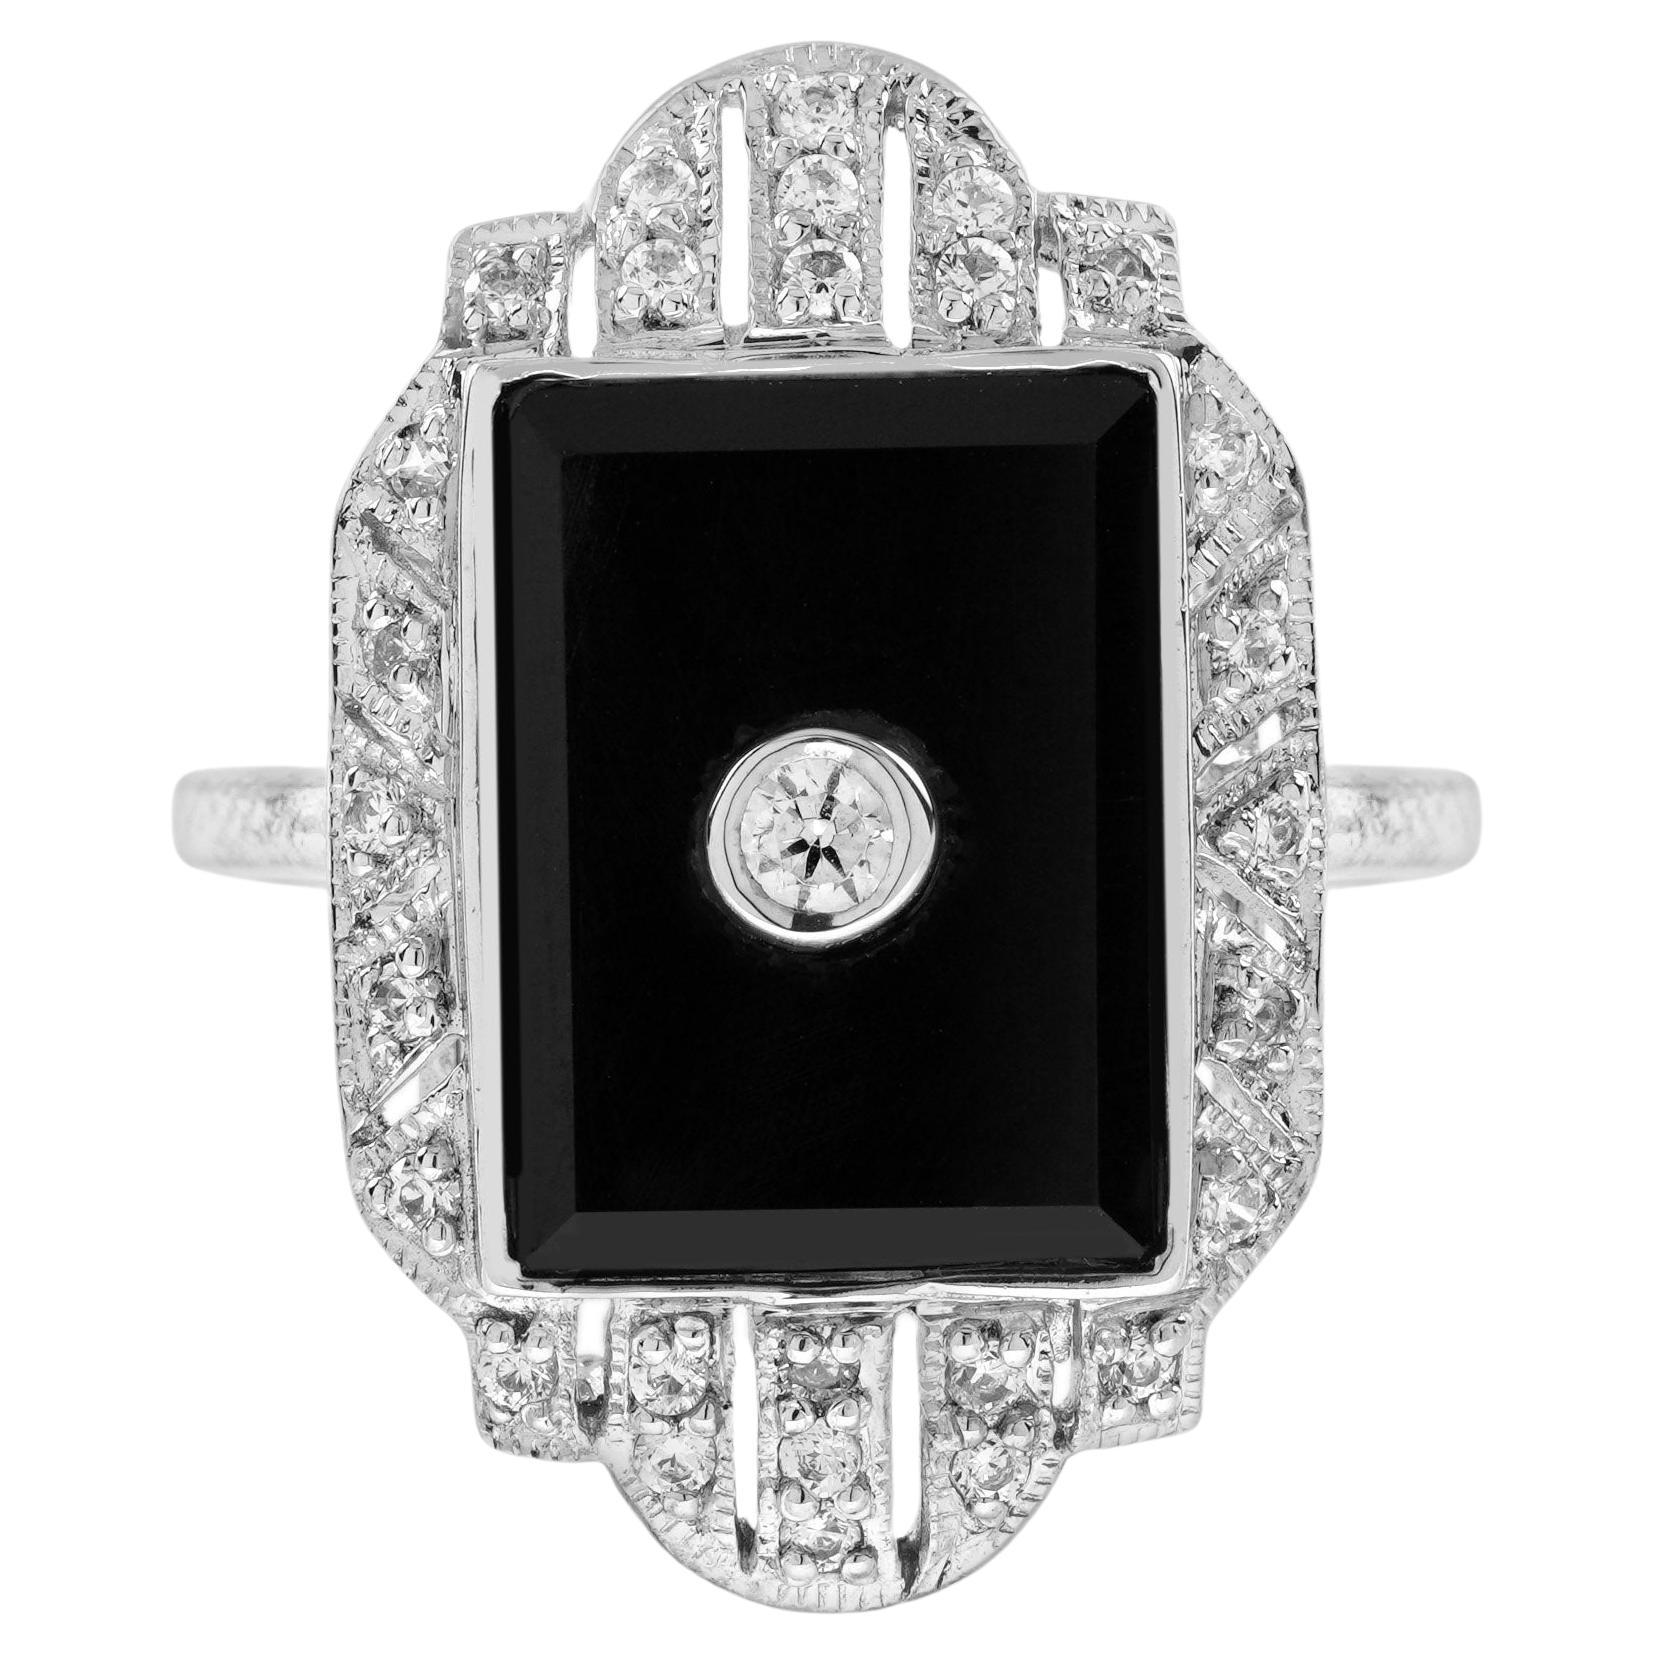 For Sale:  Diamond and Onyx Art Deco Style Dinner Ring in 14K White Gold